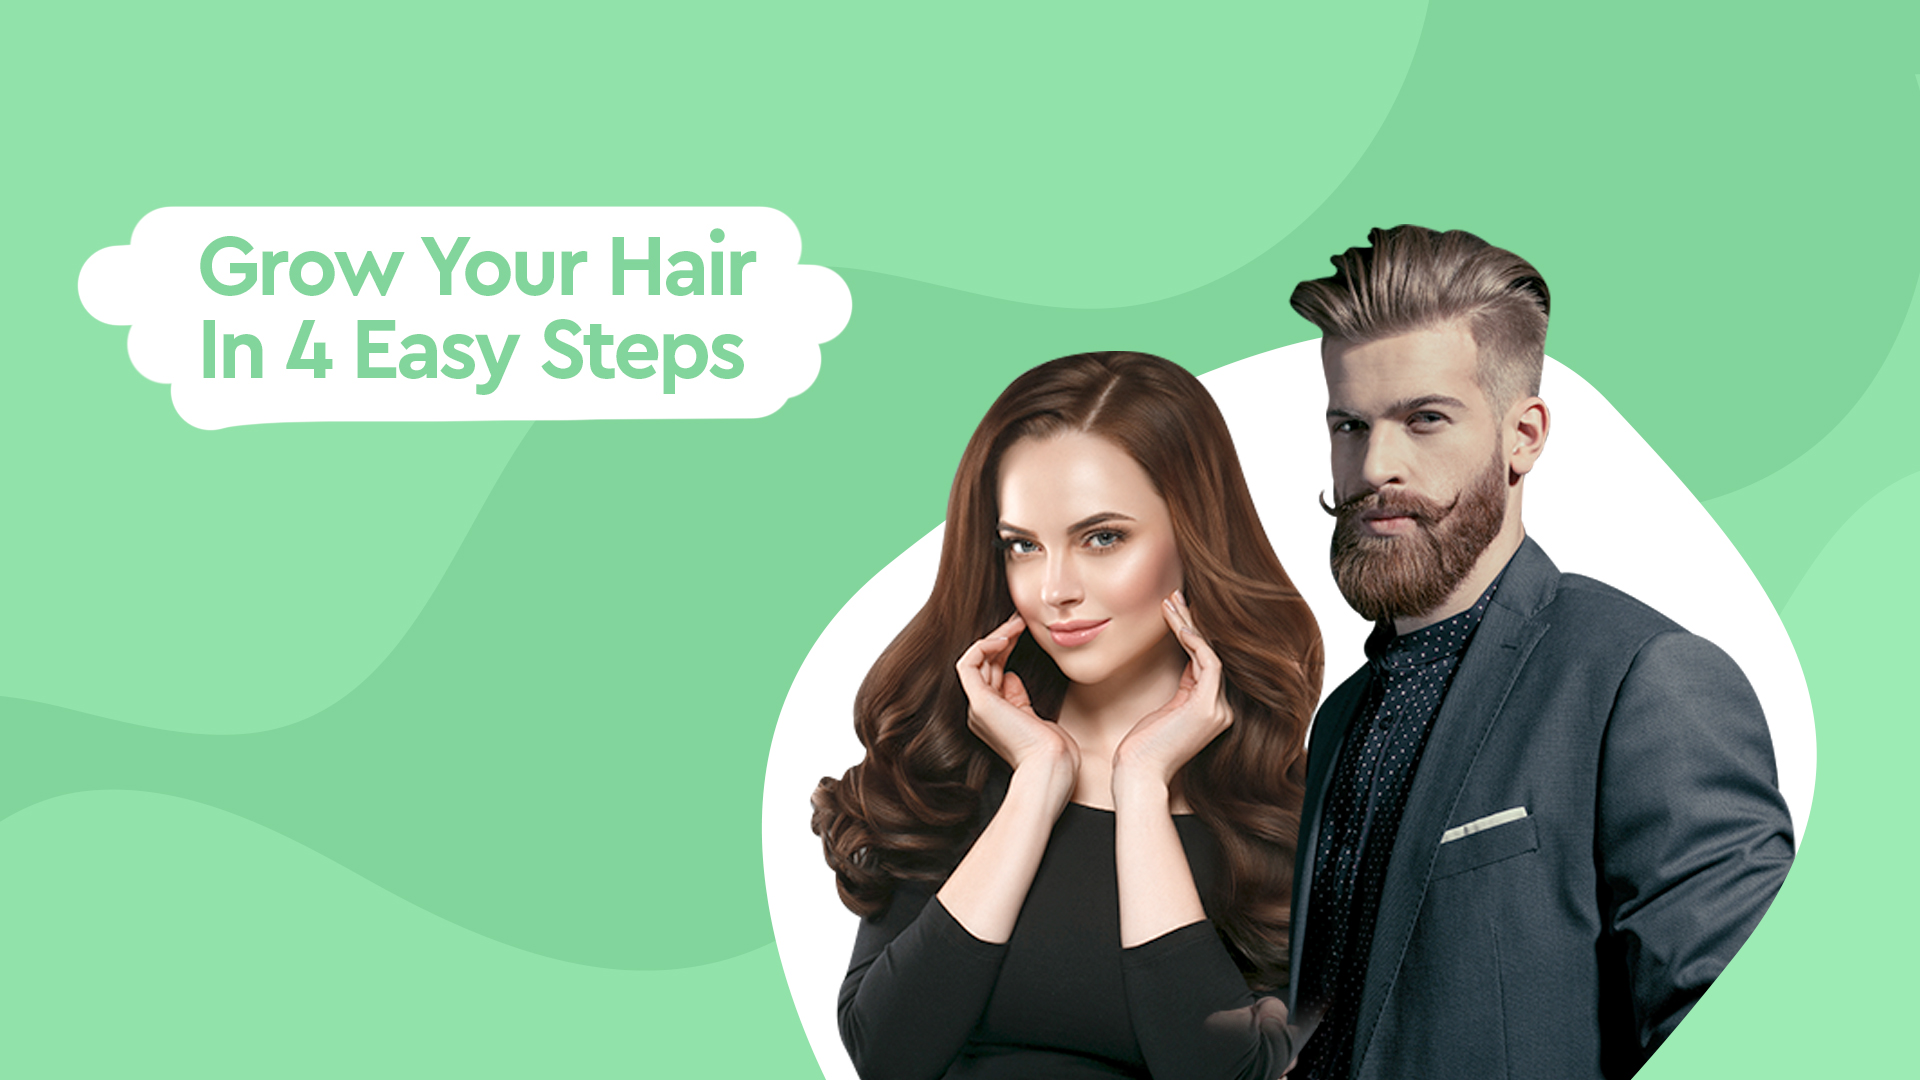 Grow Your Hair In 4 Easy Steps